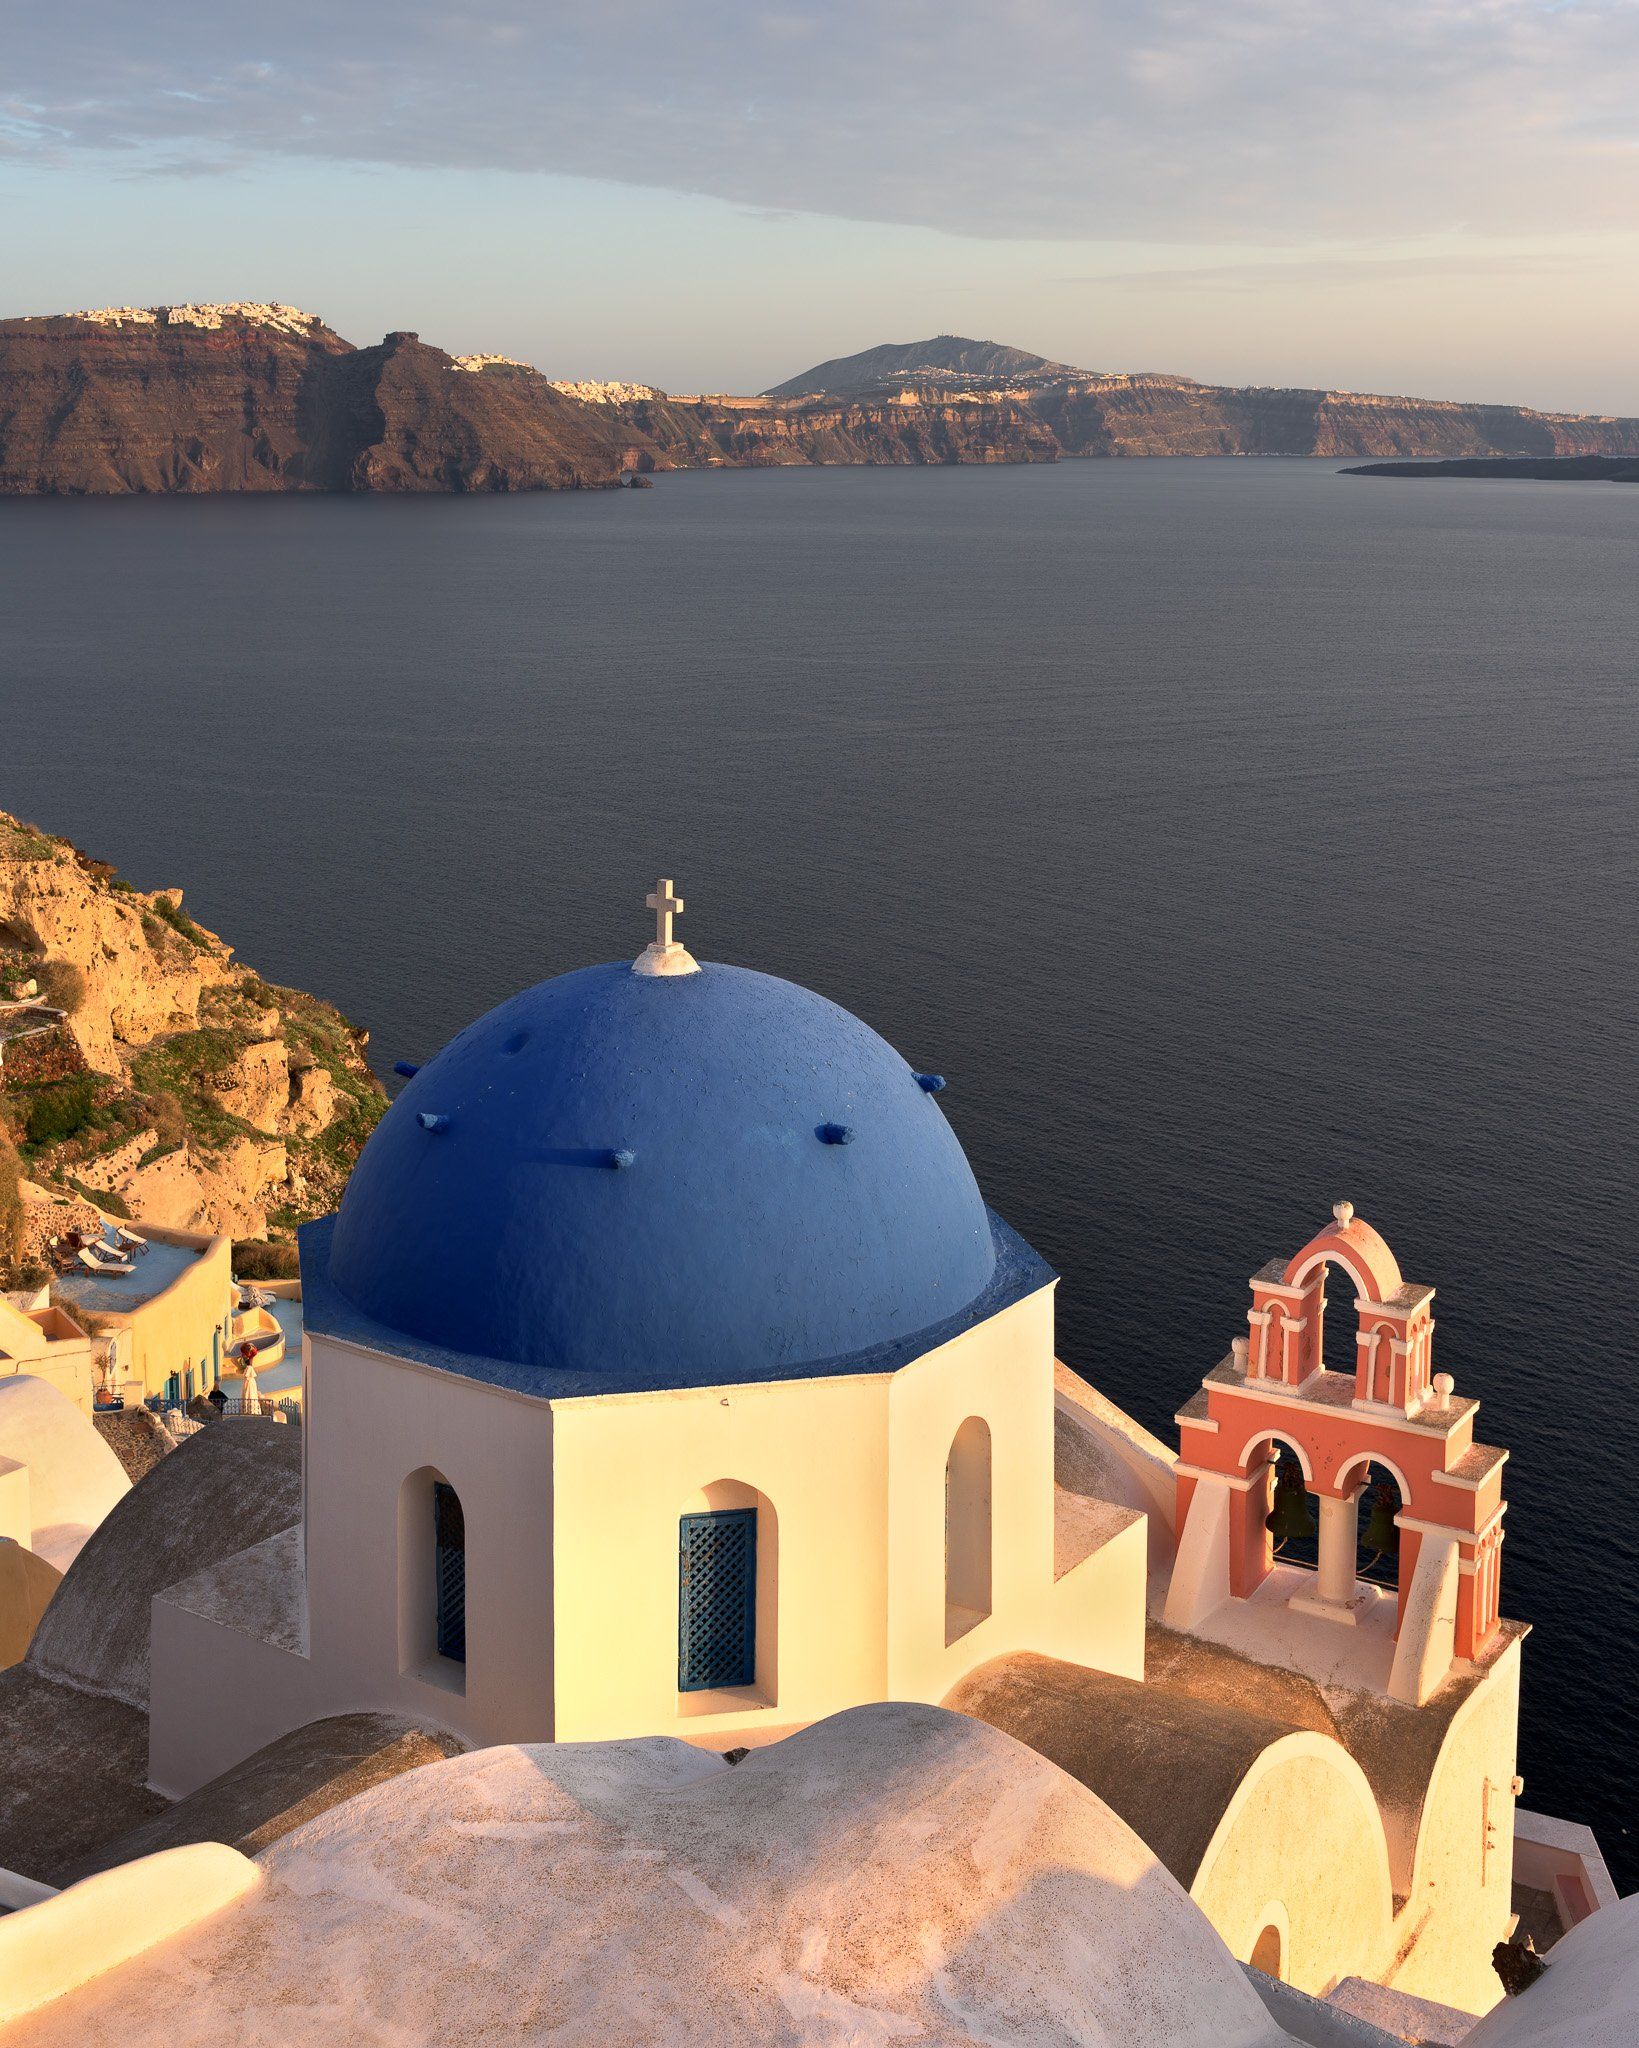 aegean, anastasis, architecture, bell, blue, building, caldera, chapel, church, city, cityscape, cliff, cupola, cyclades, cycladic, dome, europe, evening, fira, greece, house, iconic, island, landmark, landscape, mediterranean, oia, religion, resort, roma, Andrey Omelyanchuk